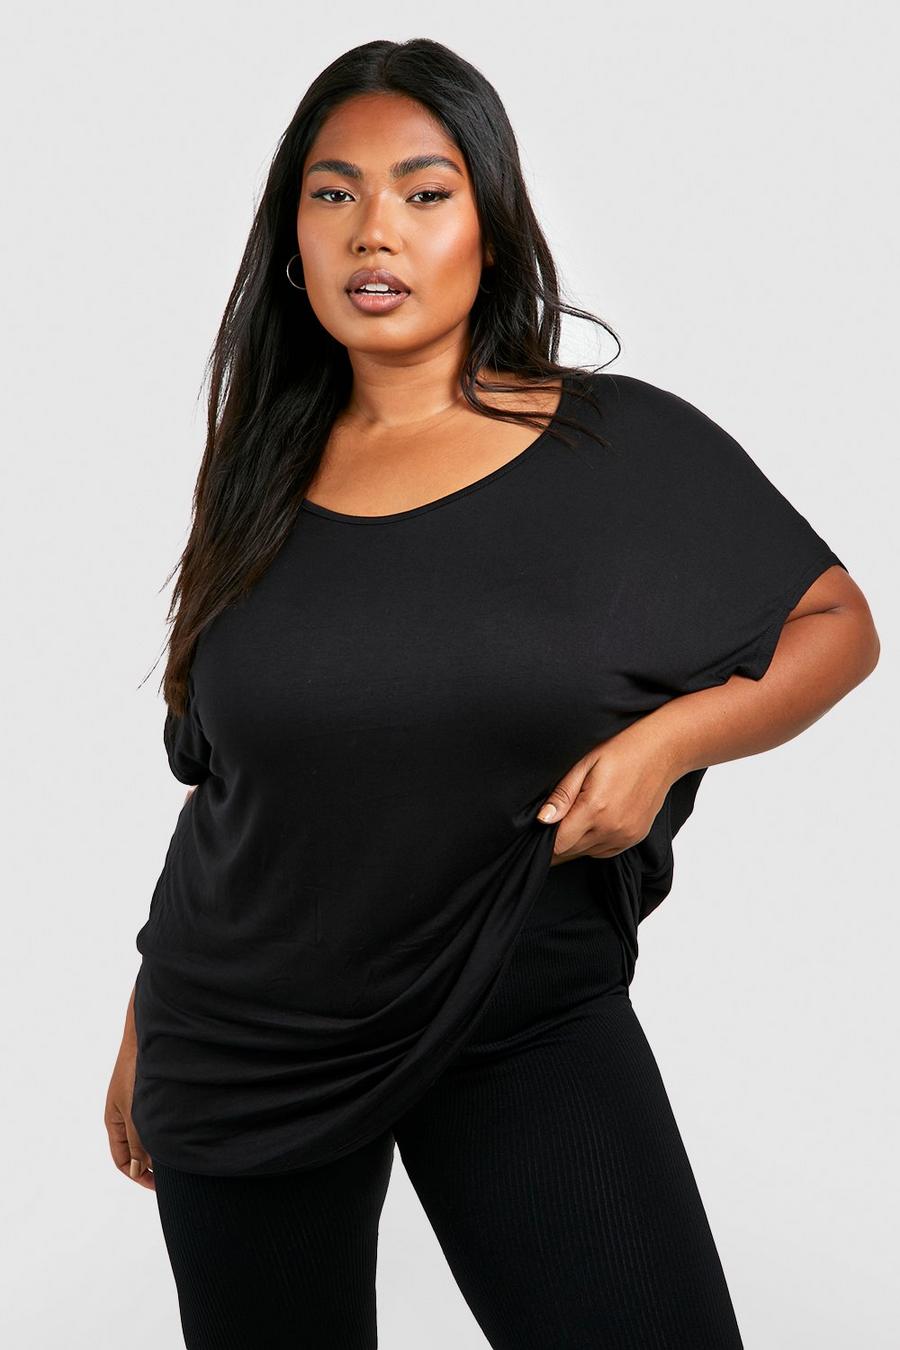 Plus Size Tops, Plus Size Tops for Women